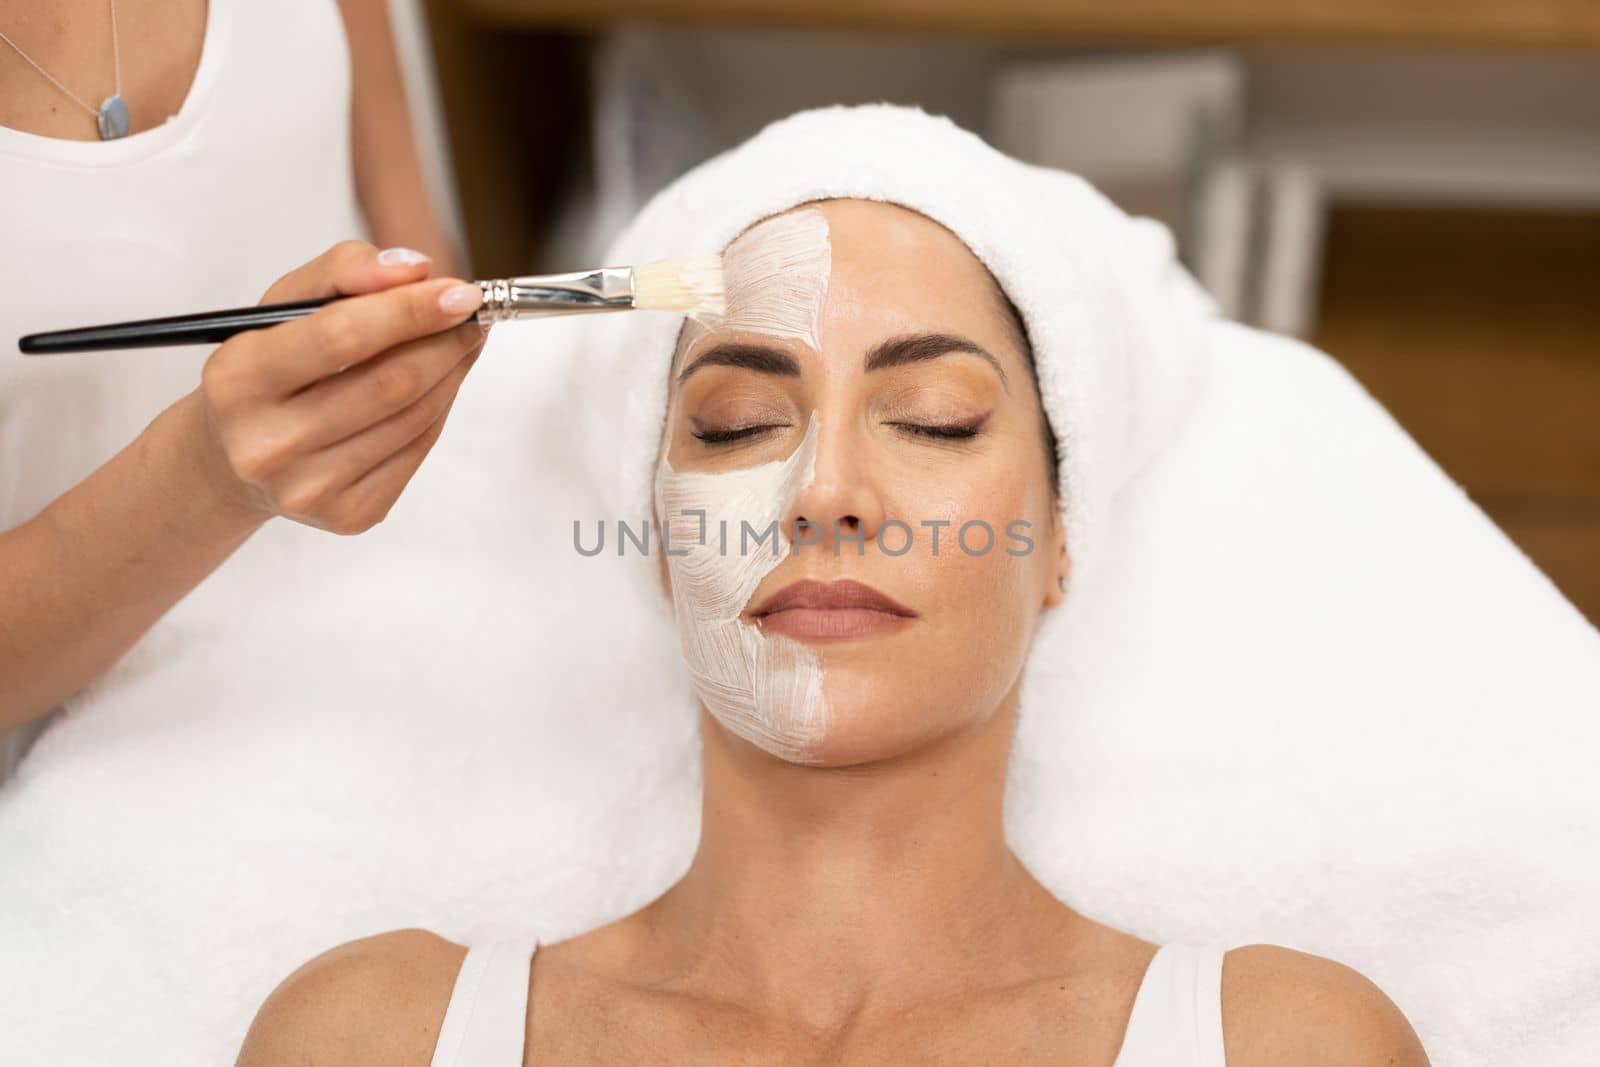 Aesthetics applying a mask to the face of a Middle-aged woman in modern wellness center. Beauty and Aesthetic concepts.